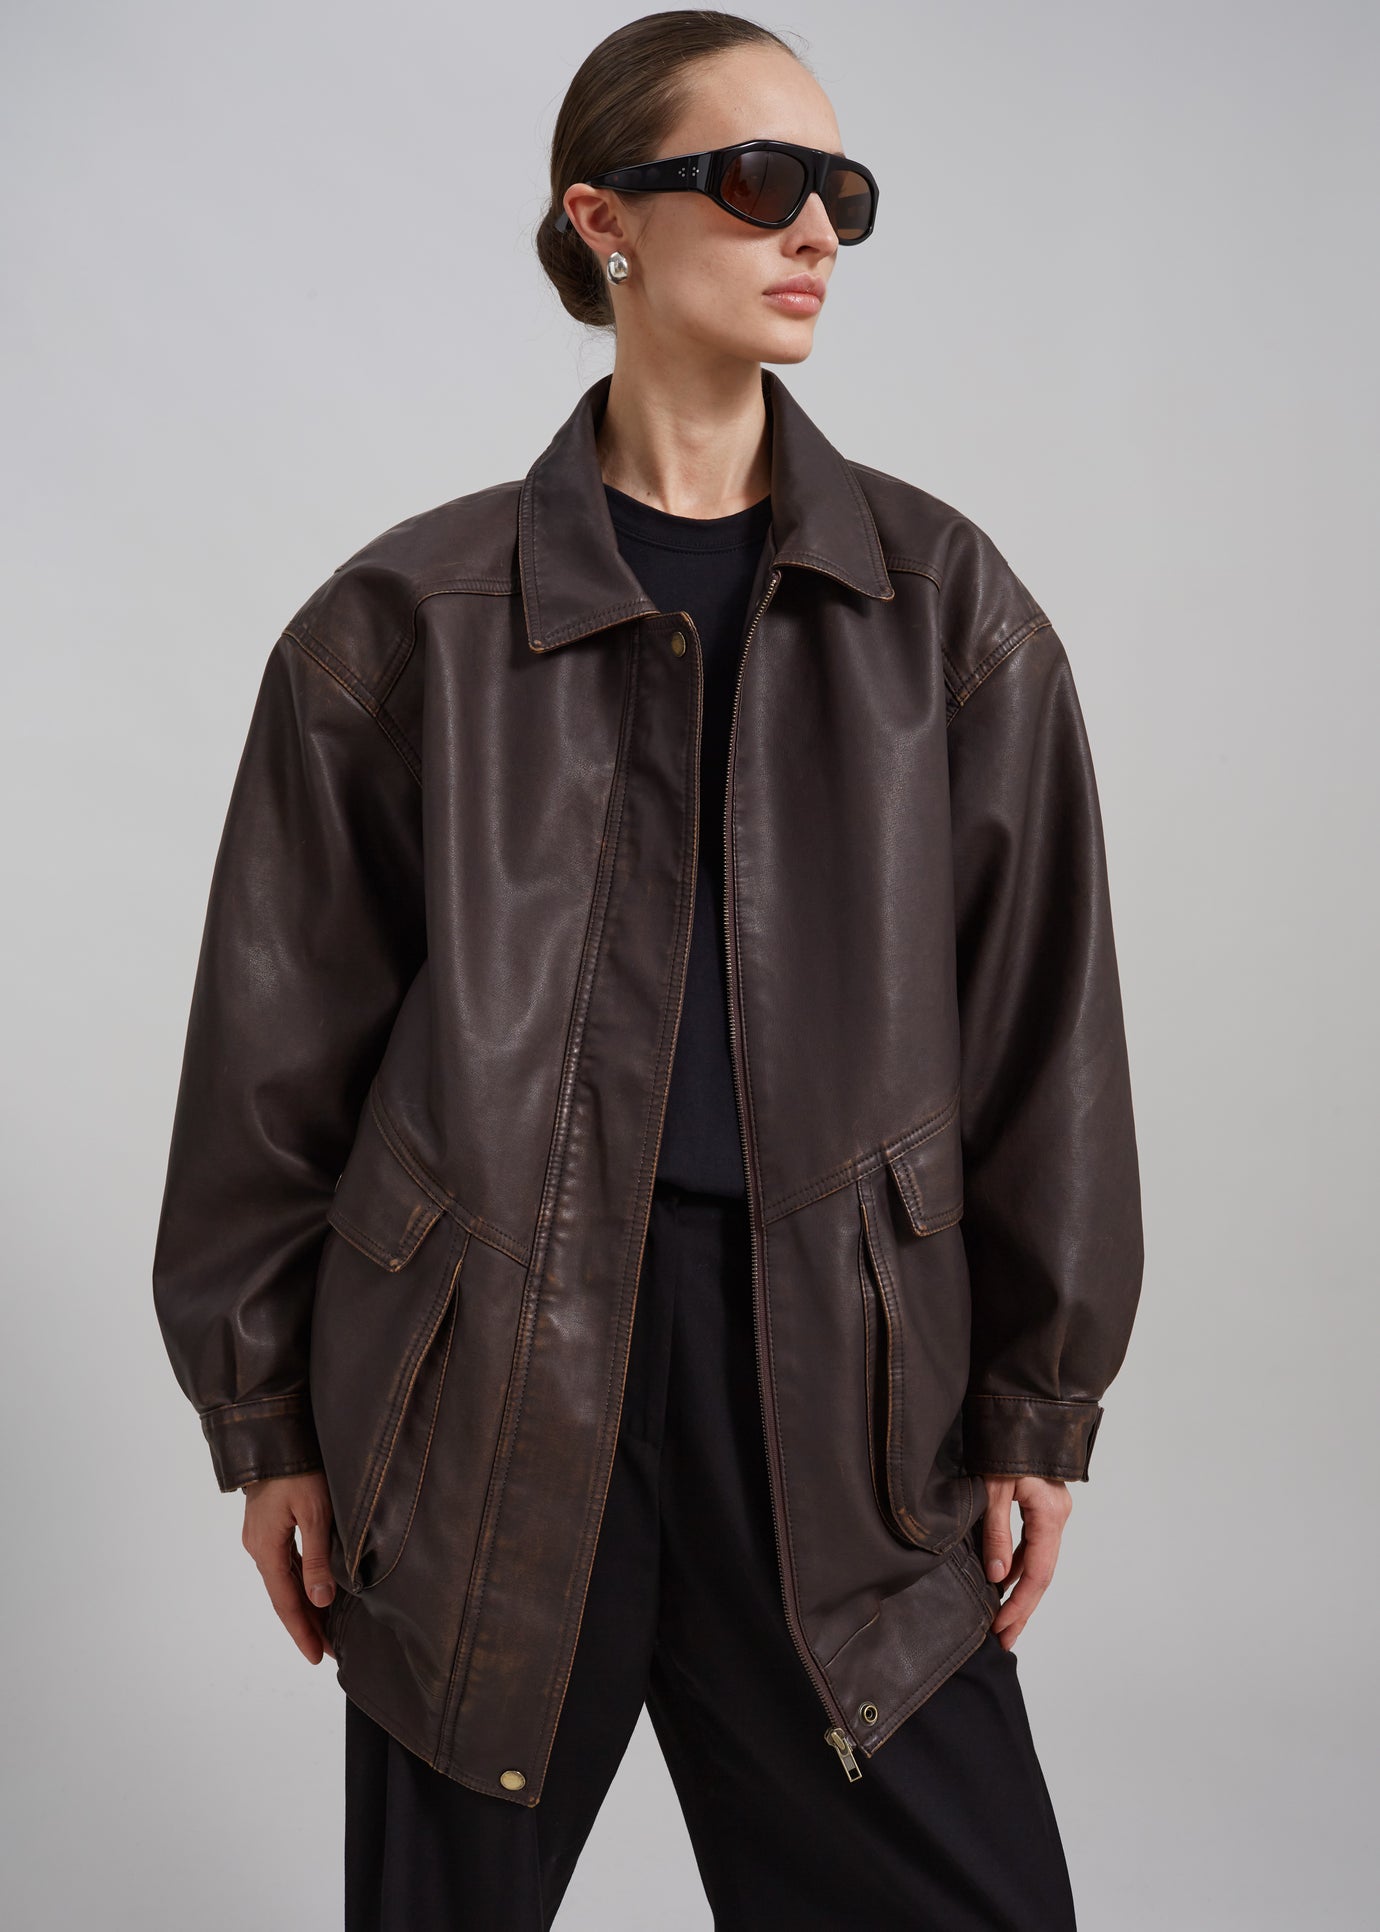 Cardiff Oversized Faux Leather Jacket - Brown